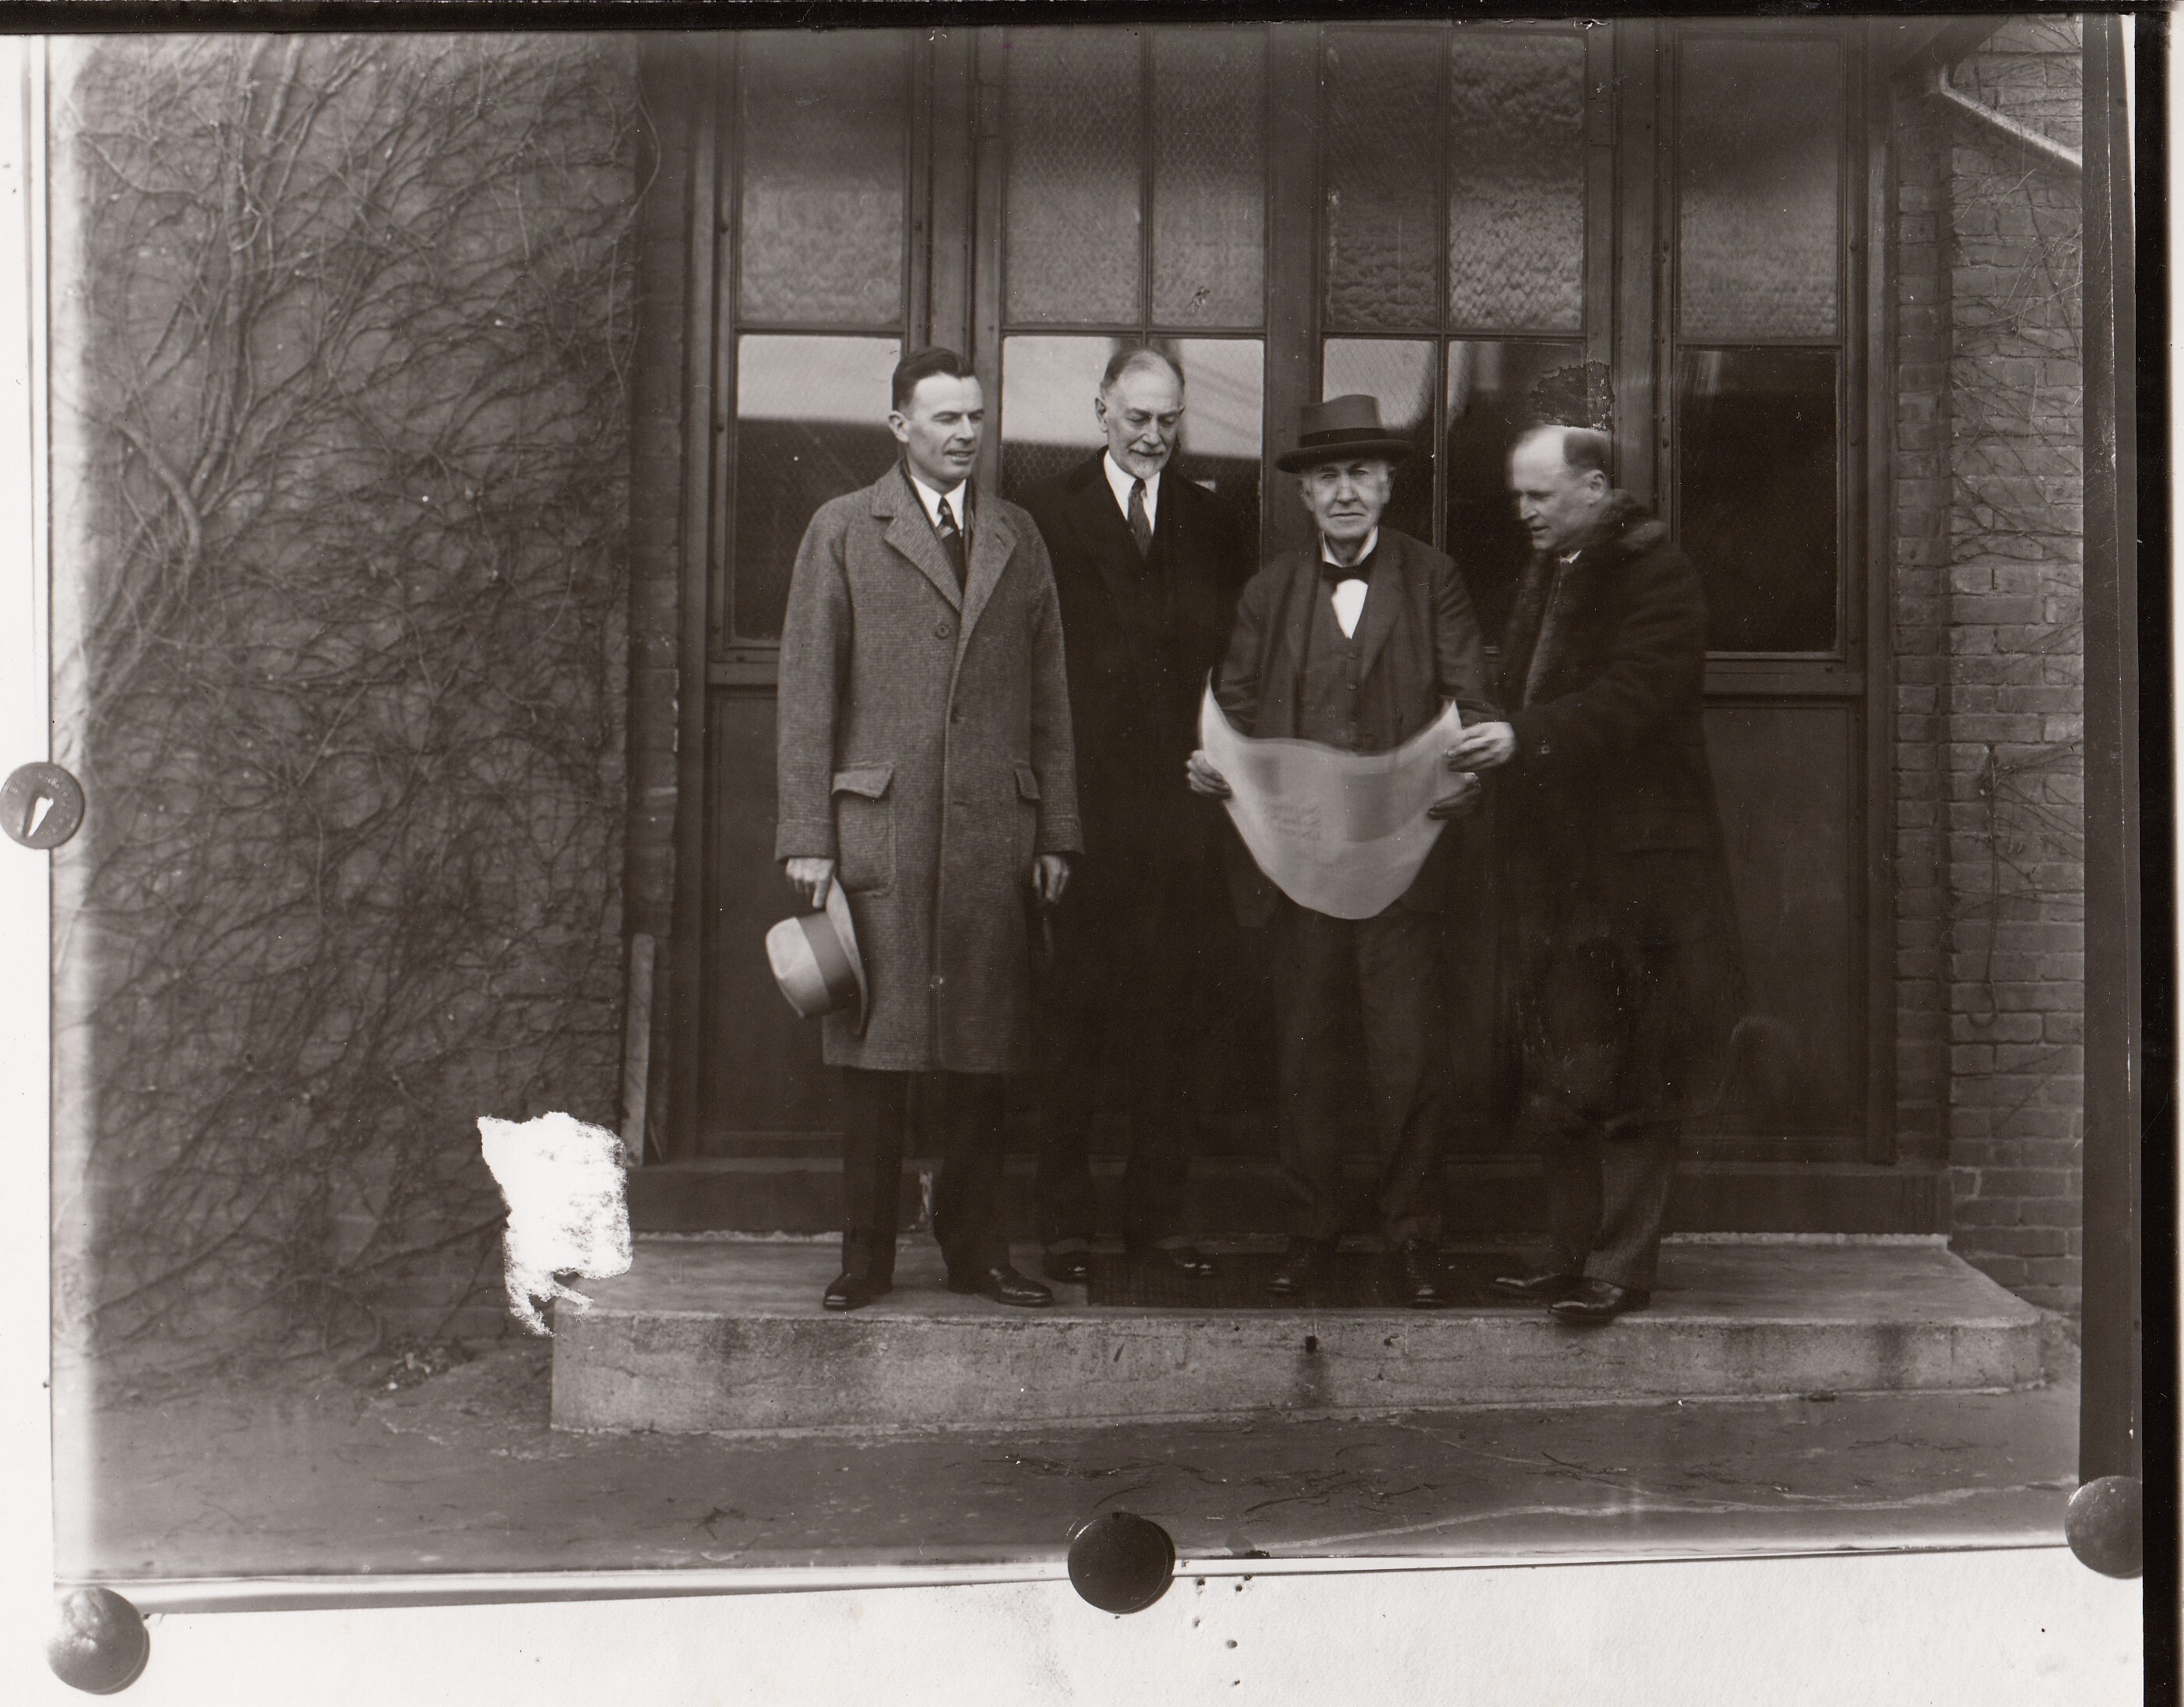 George E. Montgomery, Nelson C. Durand, Thomas Edison, and unidentified man in front of Building 5.